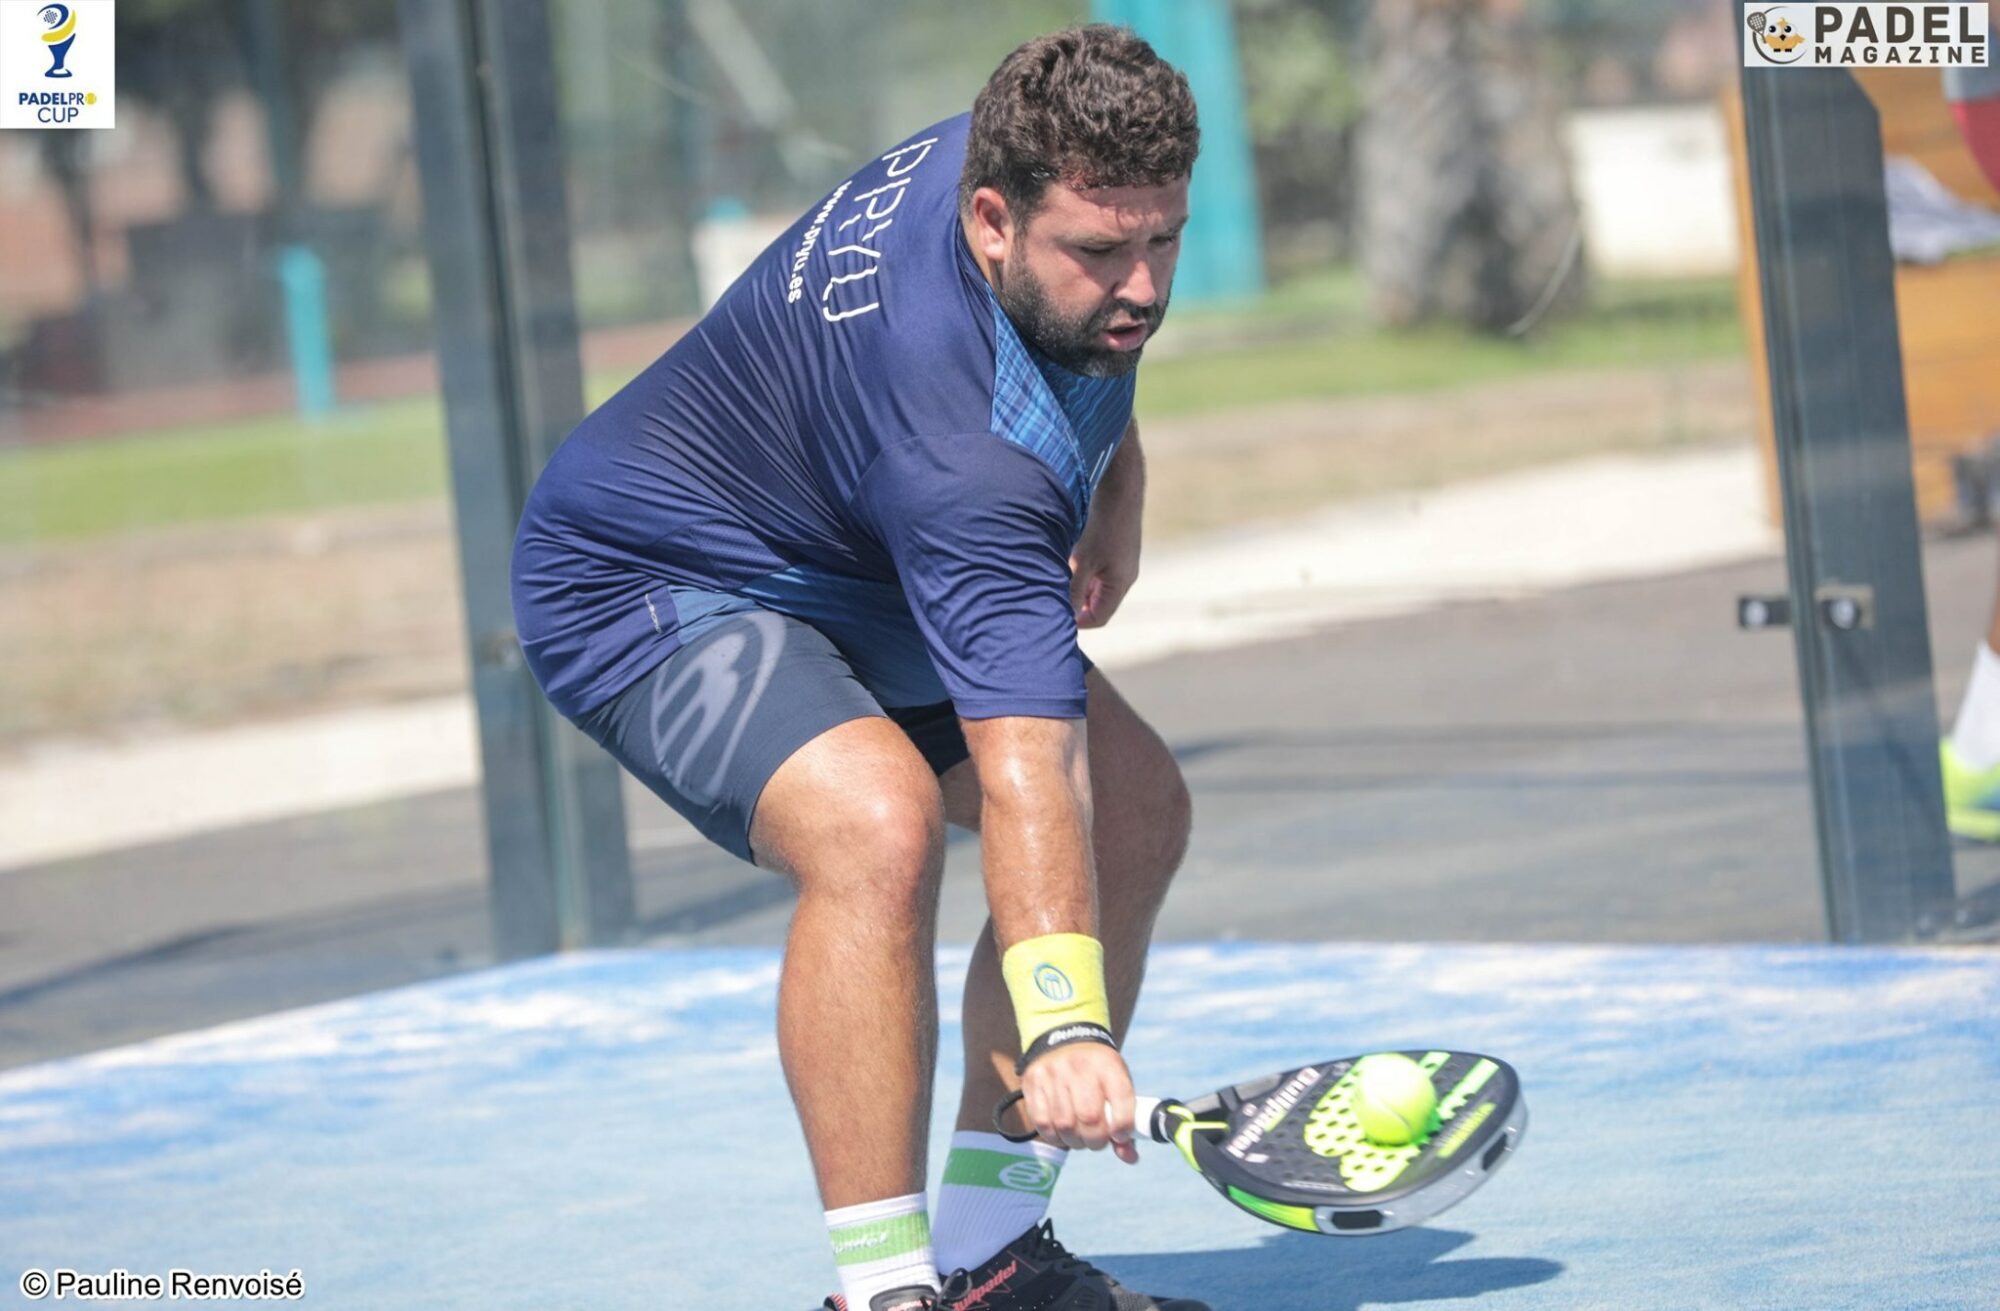 The lob, the essential of padel